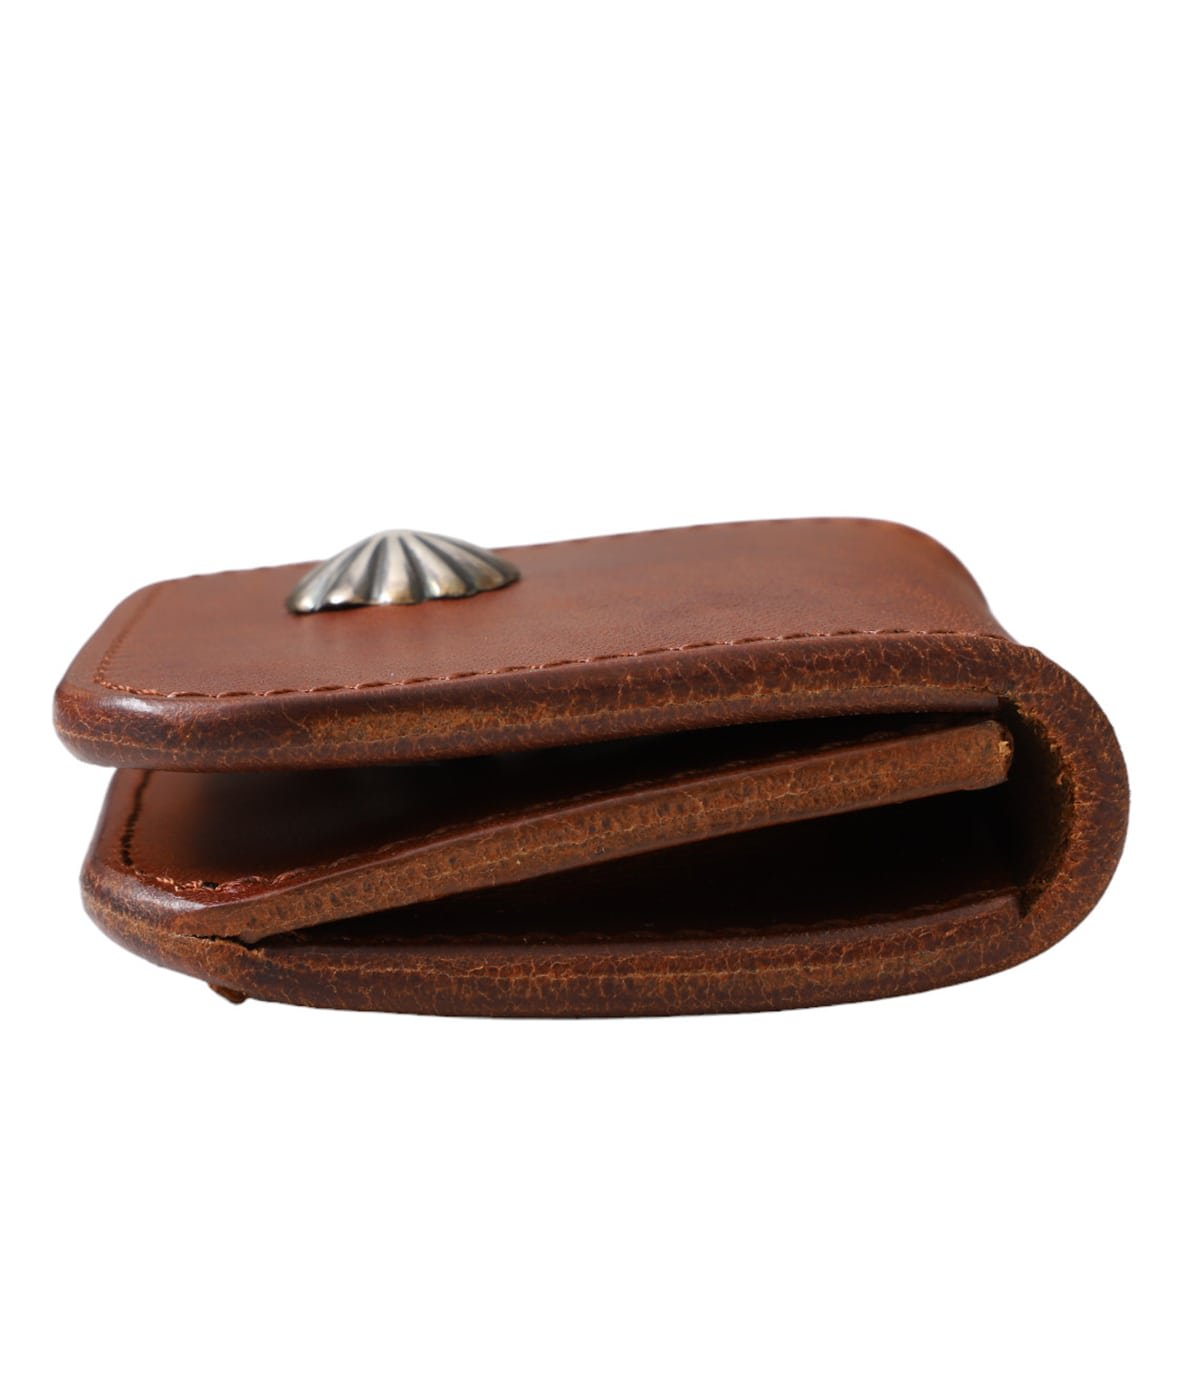 CLASSIC COIN CASE No.1 (SHELL) | LARRY SMITH(ラリースミス 